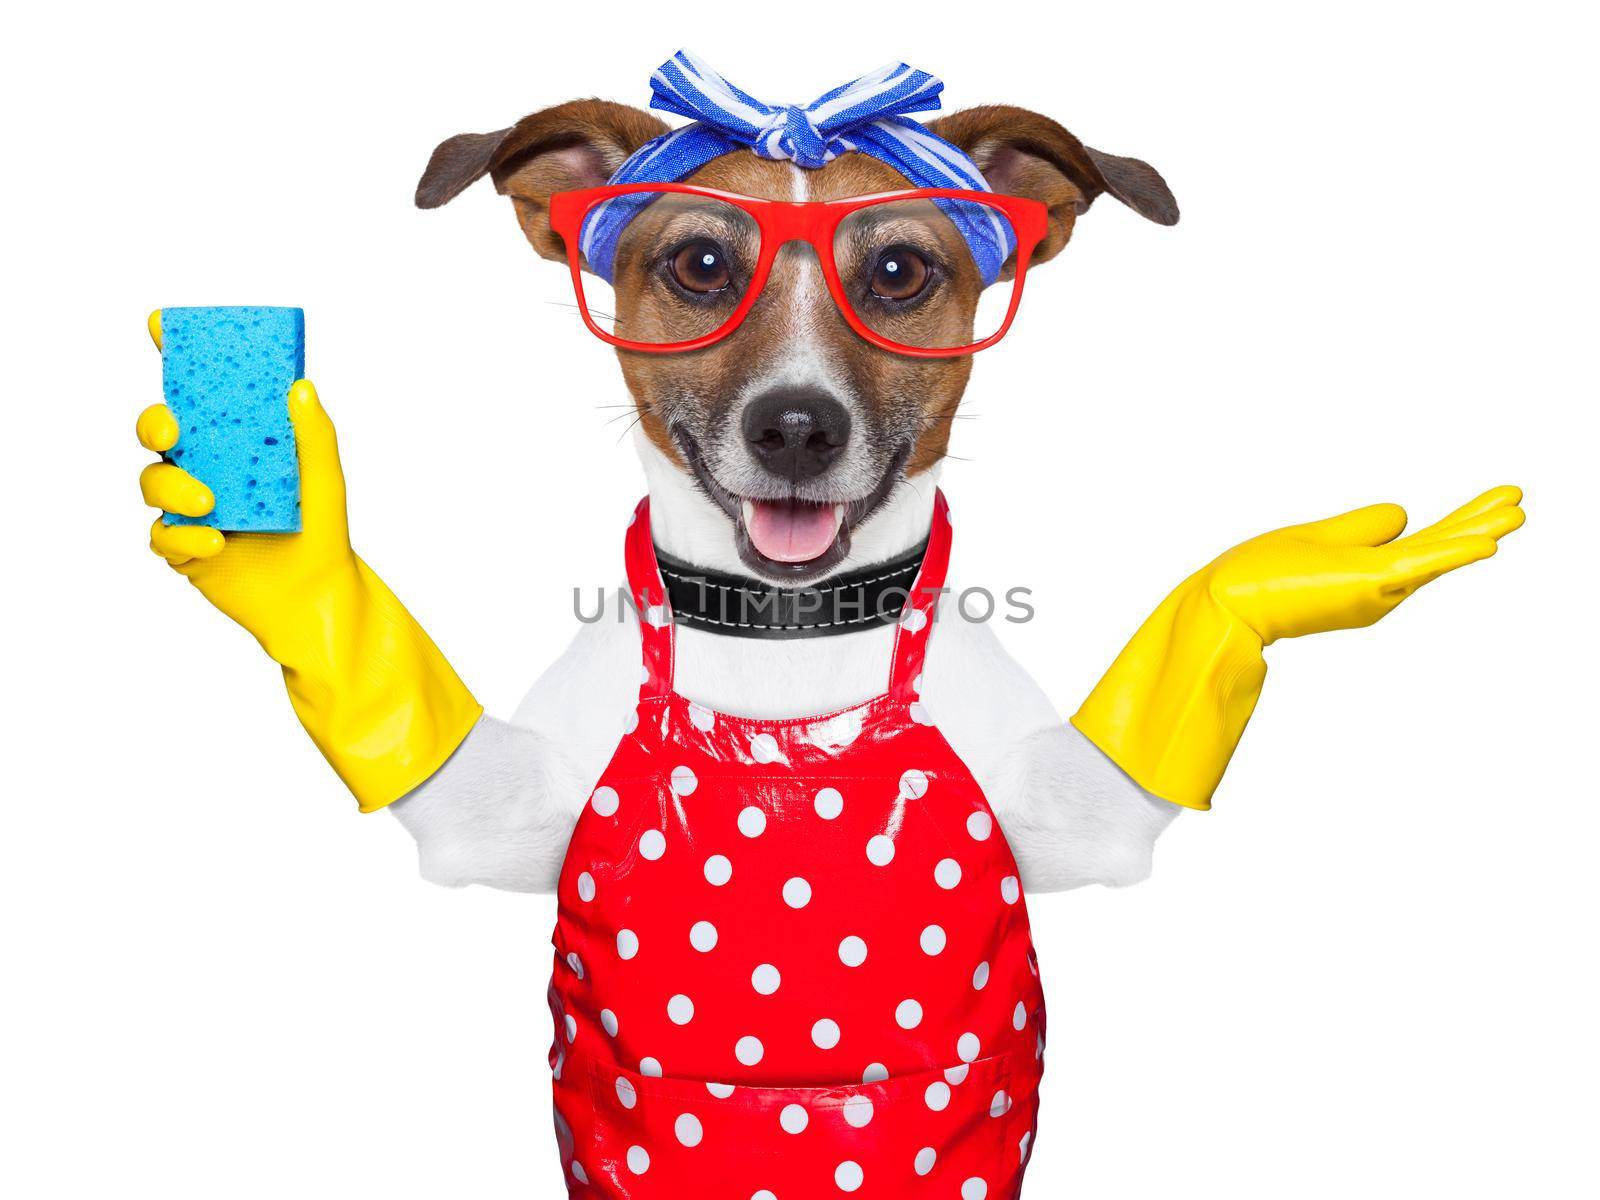 housewife dog with rubber gloves and a blue sponge